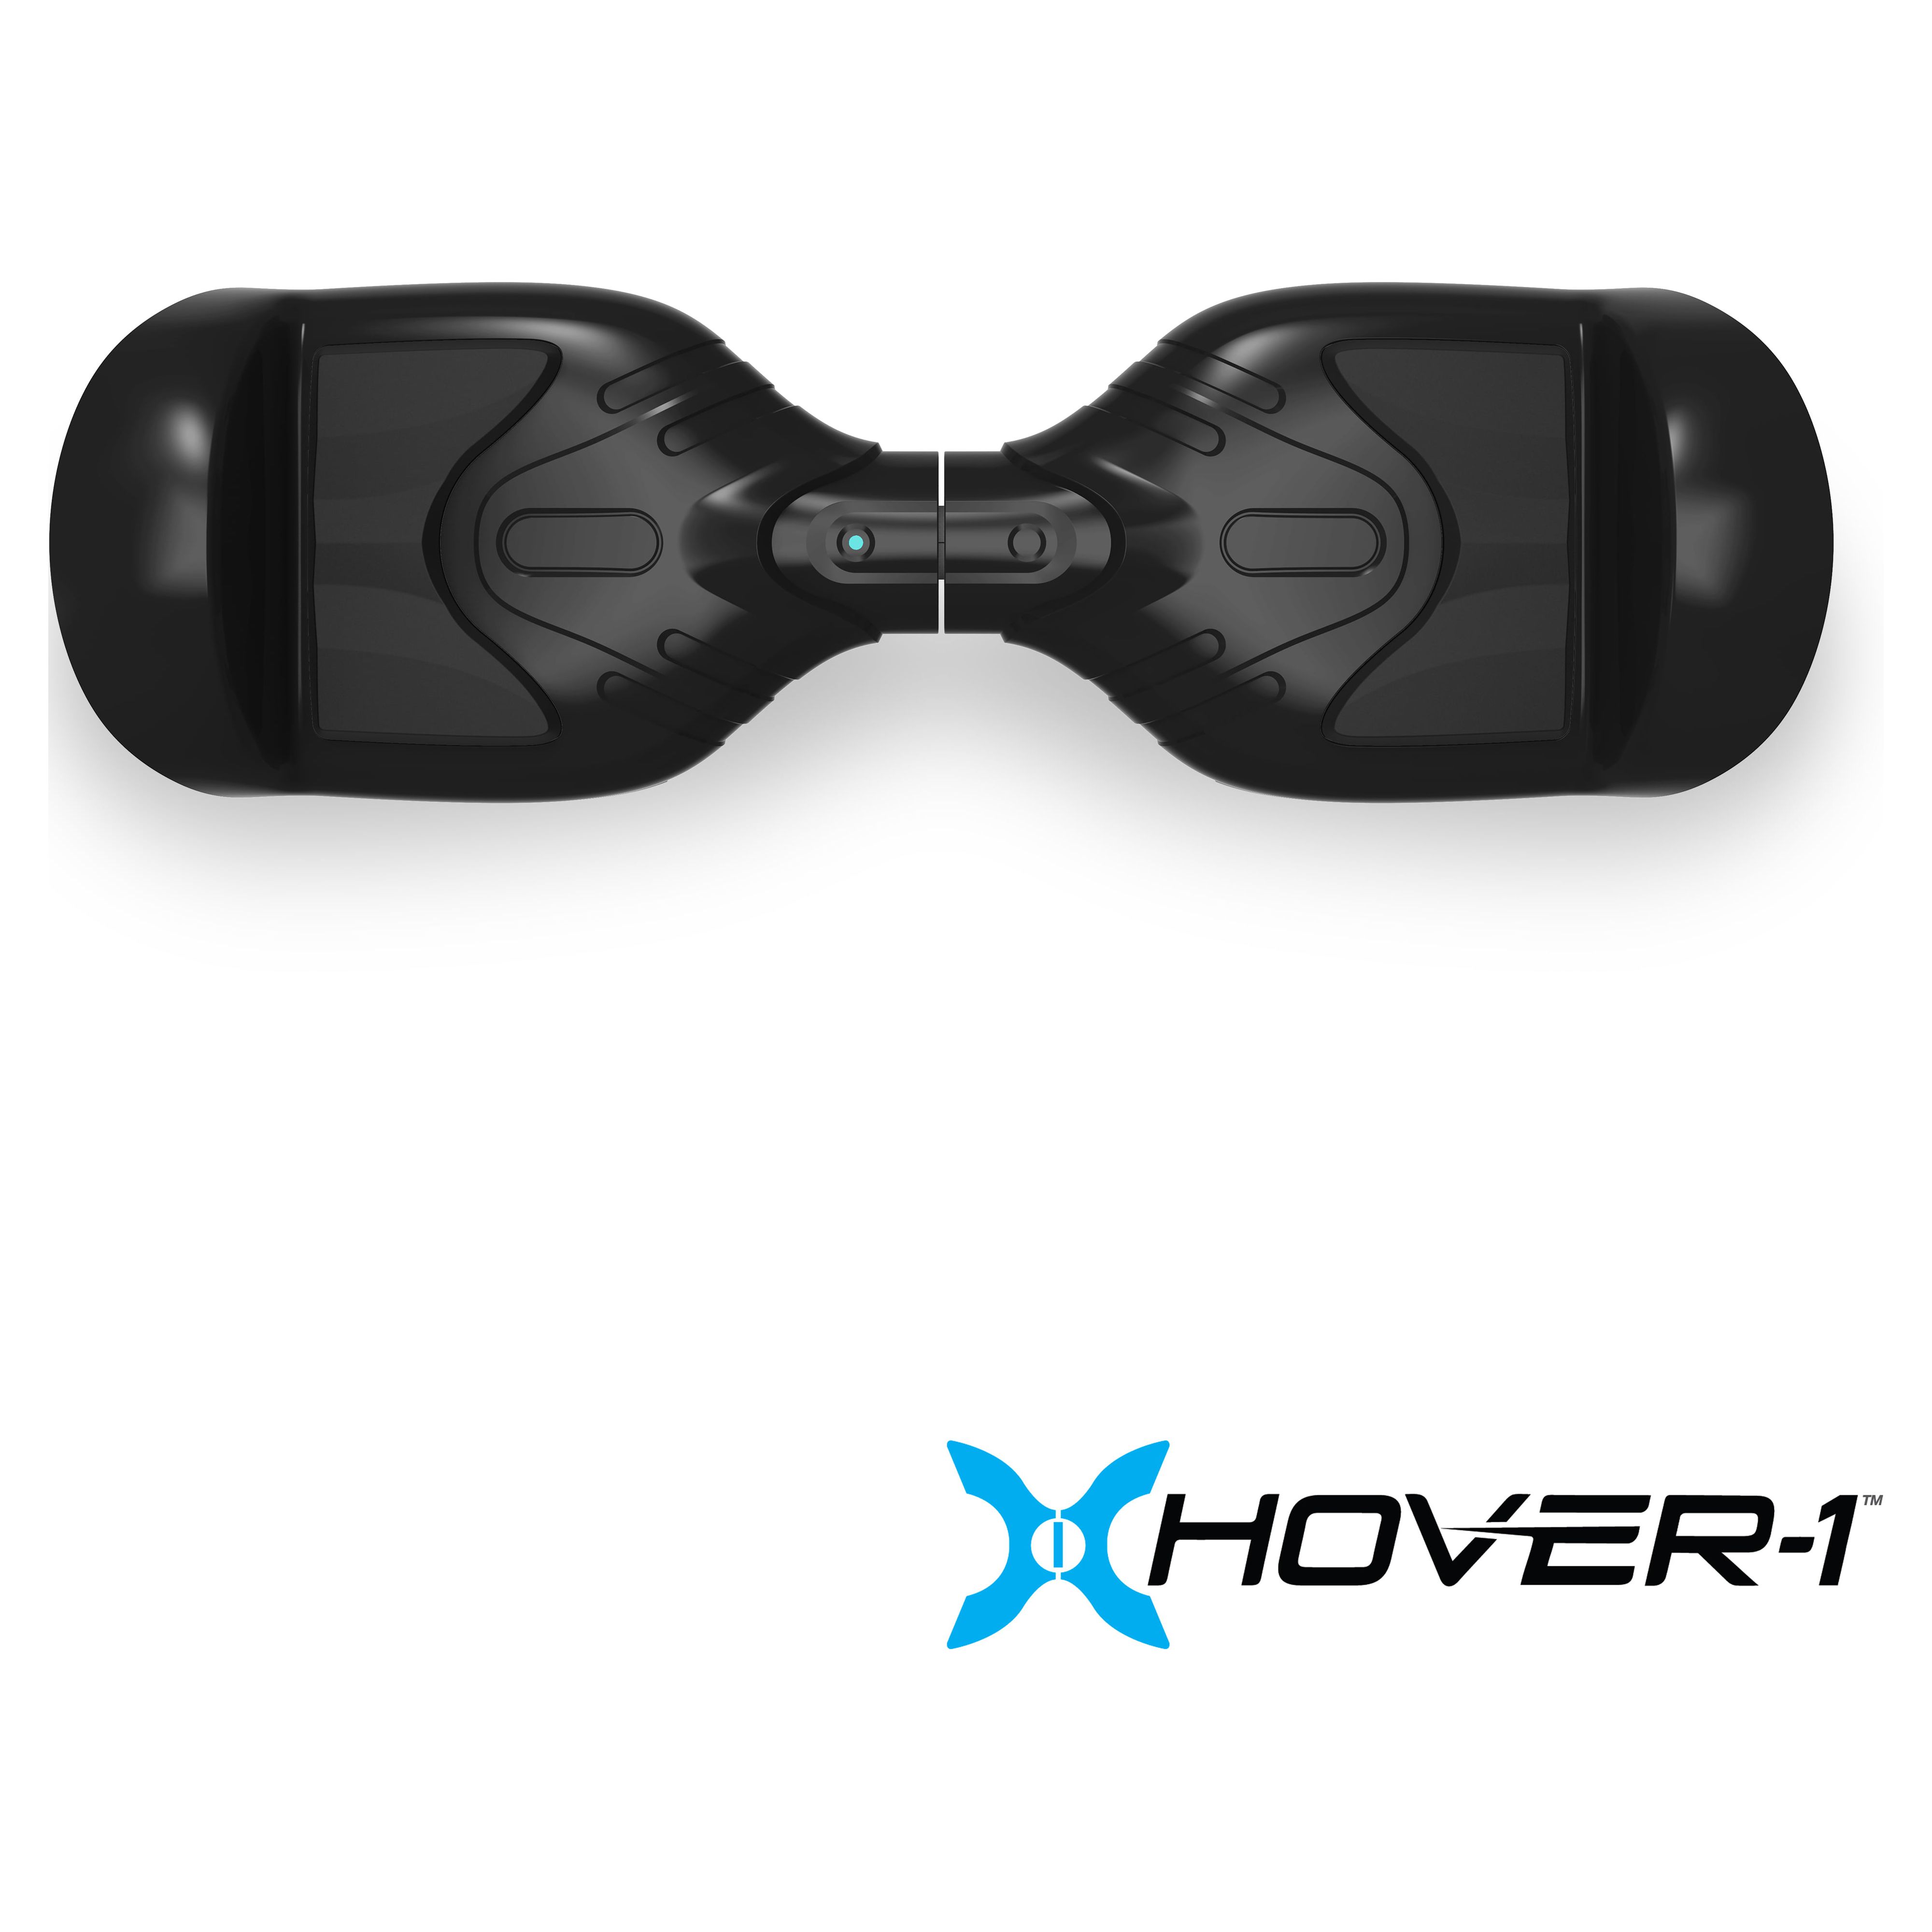 Hover-1 Nova Hoverboard Max Distance 6 Miles - image 11 of 11